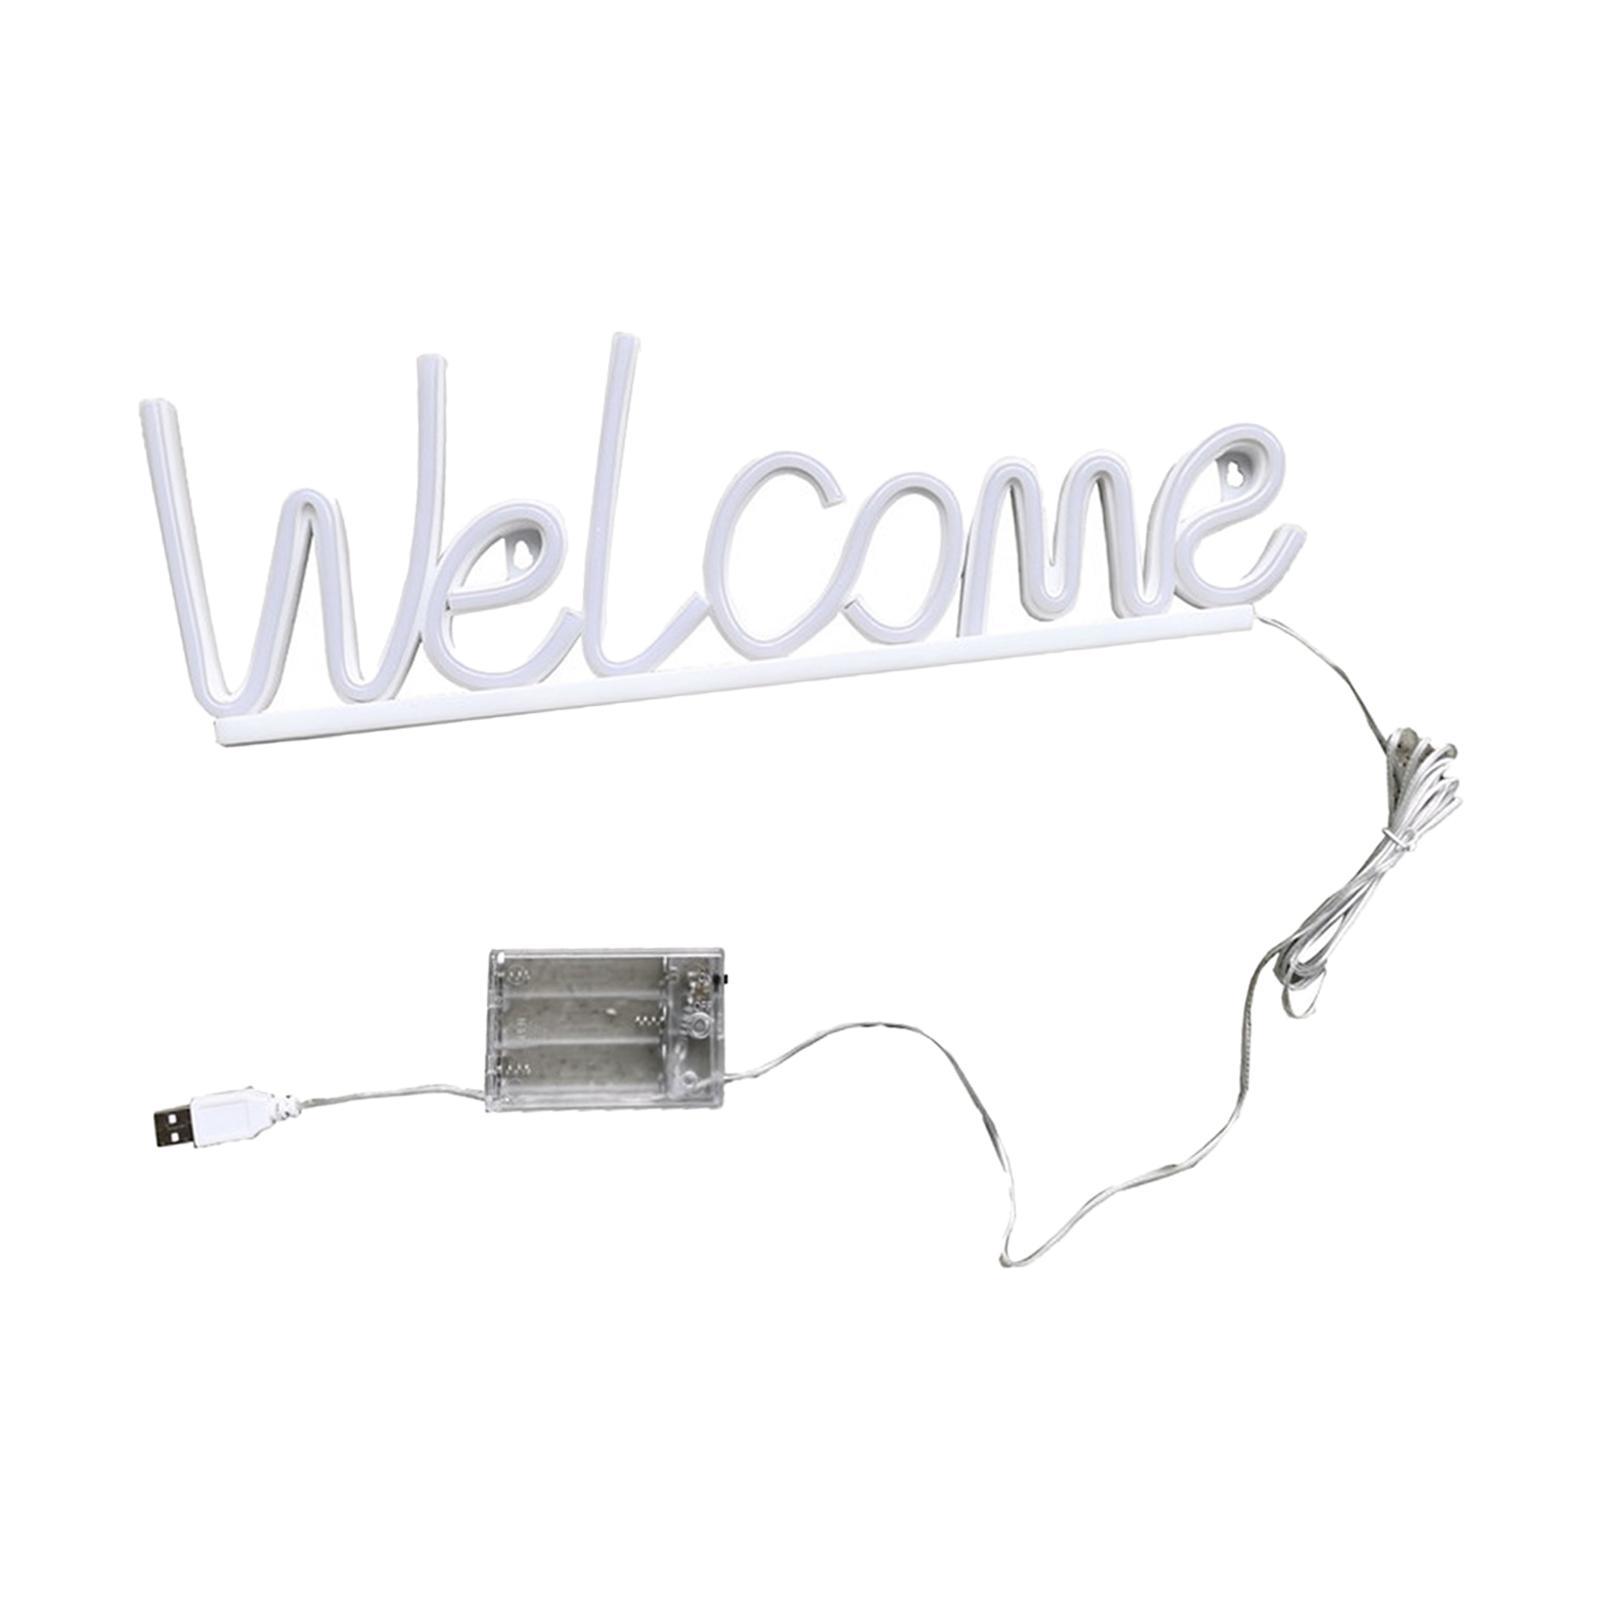 Welcome Neon Sign Decorative Lamp Neon Light Sign for Bar Pub Store